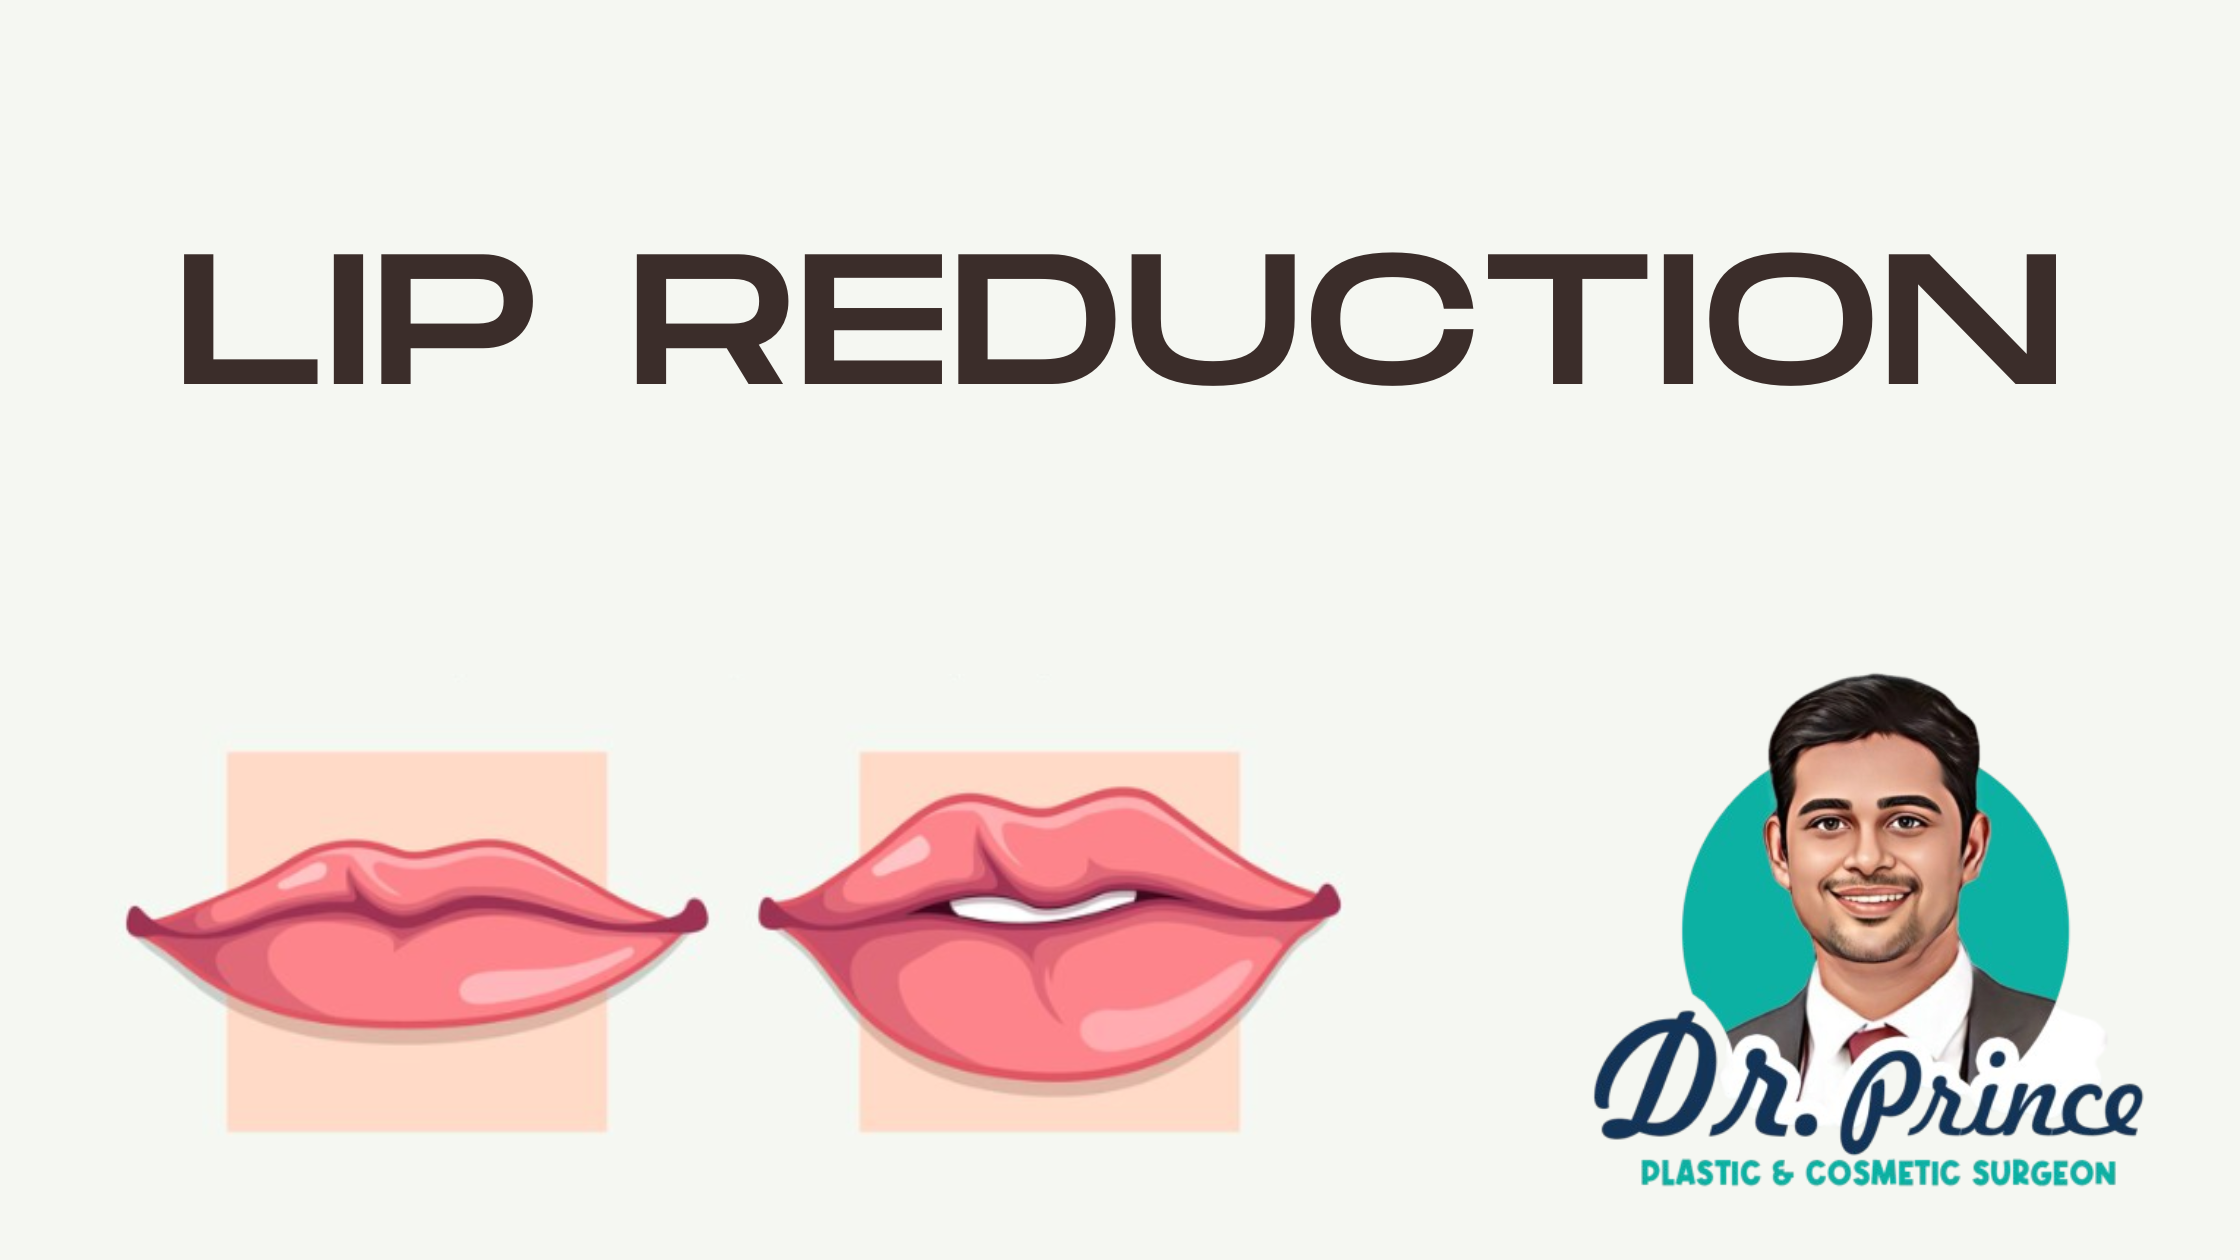 Dr. Prince, the Best Plastic Surgeon in Thrissur, performing lip reduction surgery to achieve natural and balanced facial harmony. The image showcases the expertise and personalized care at Sushrutha Institute of Plastic Surgery, Elite Hospital, Thrissur.